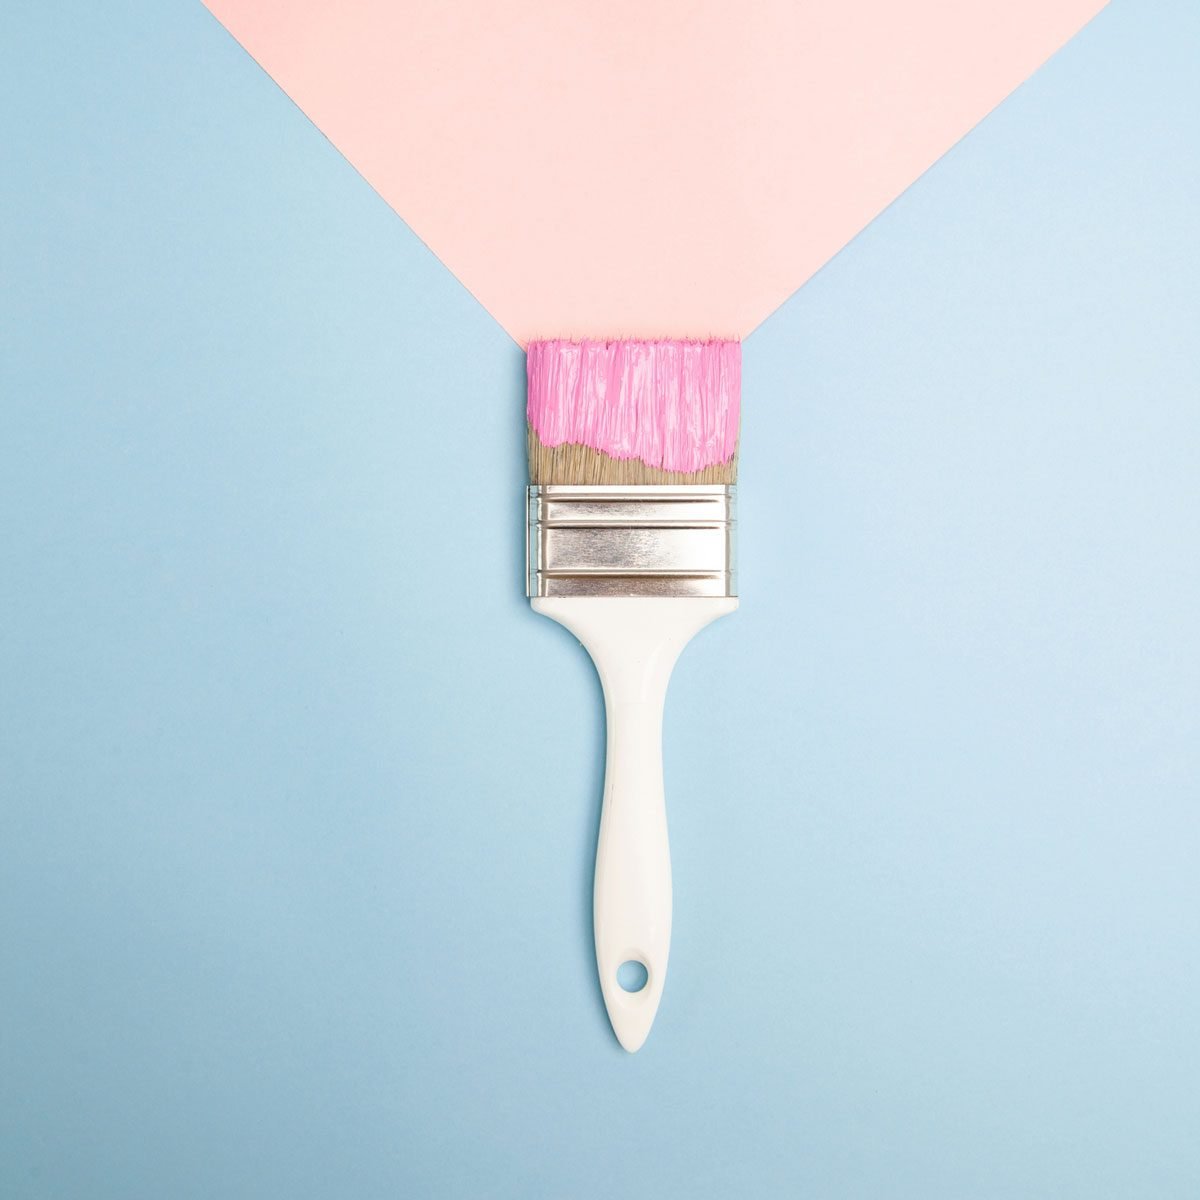 Paint Brush Gettyimages 1249257101